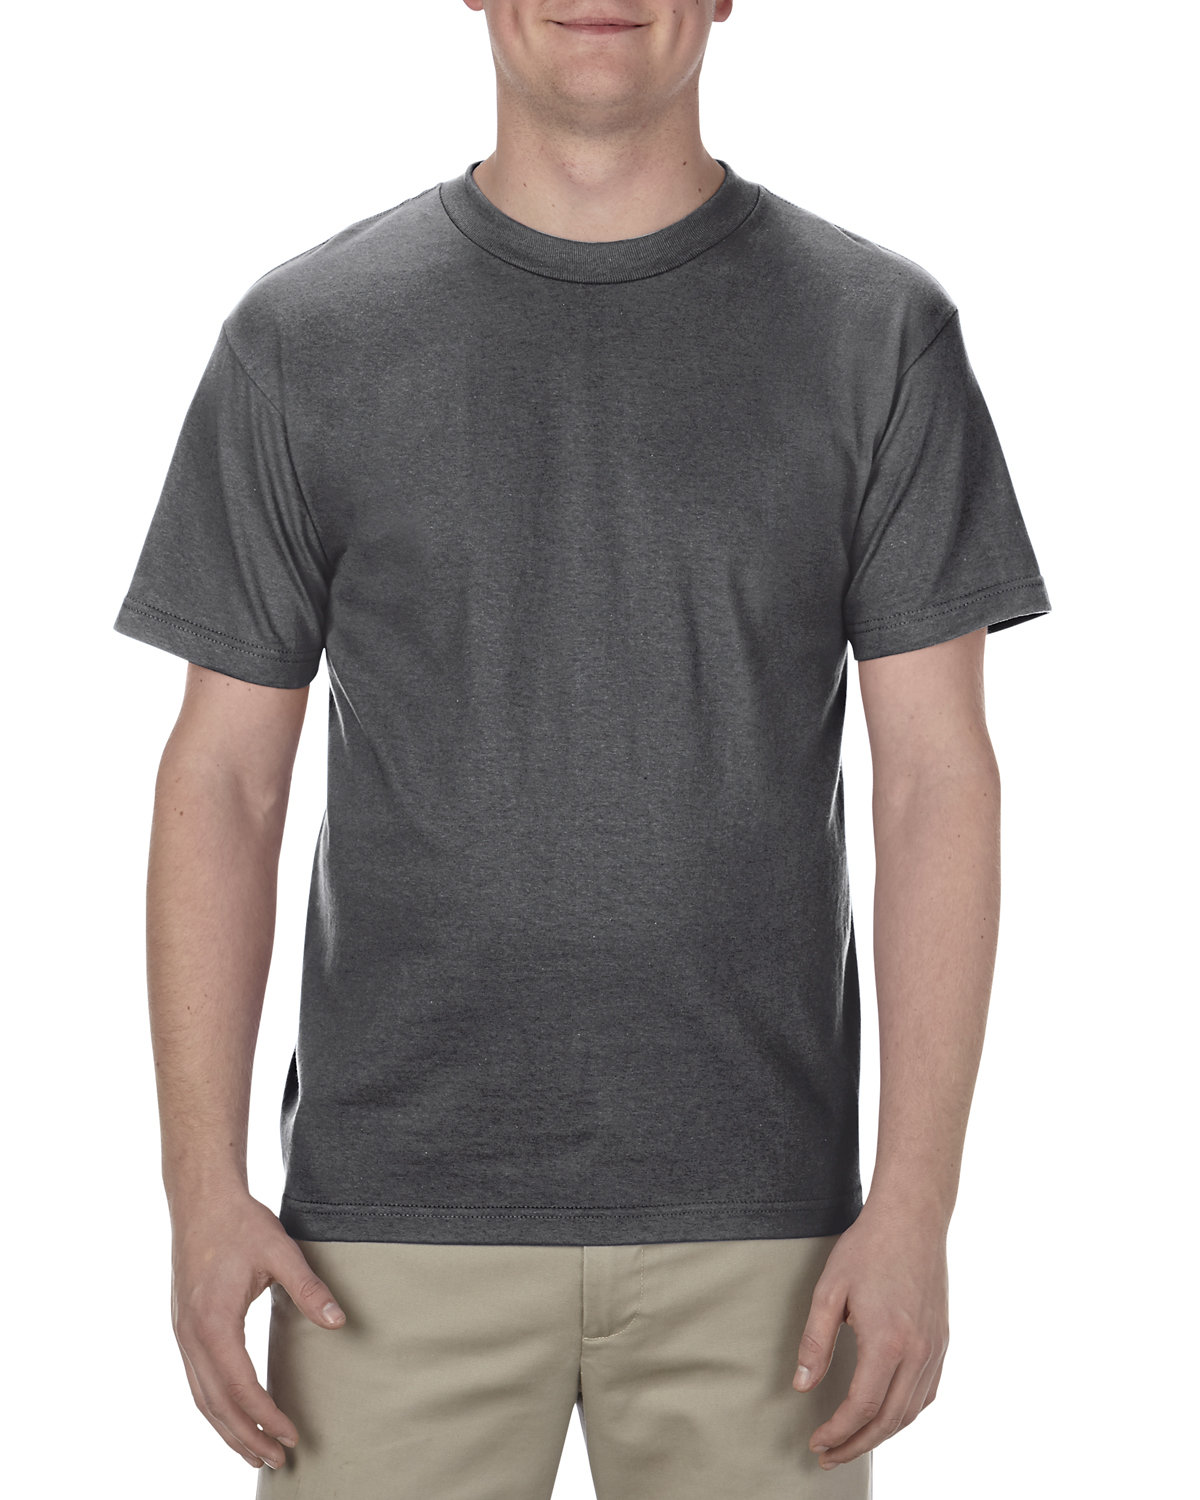 American Apparel Adult 6.0 oz., 100% Cotton T-Shirt HEATHER CHARCOAL 